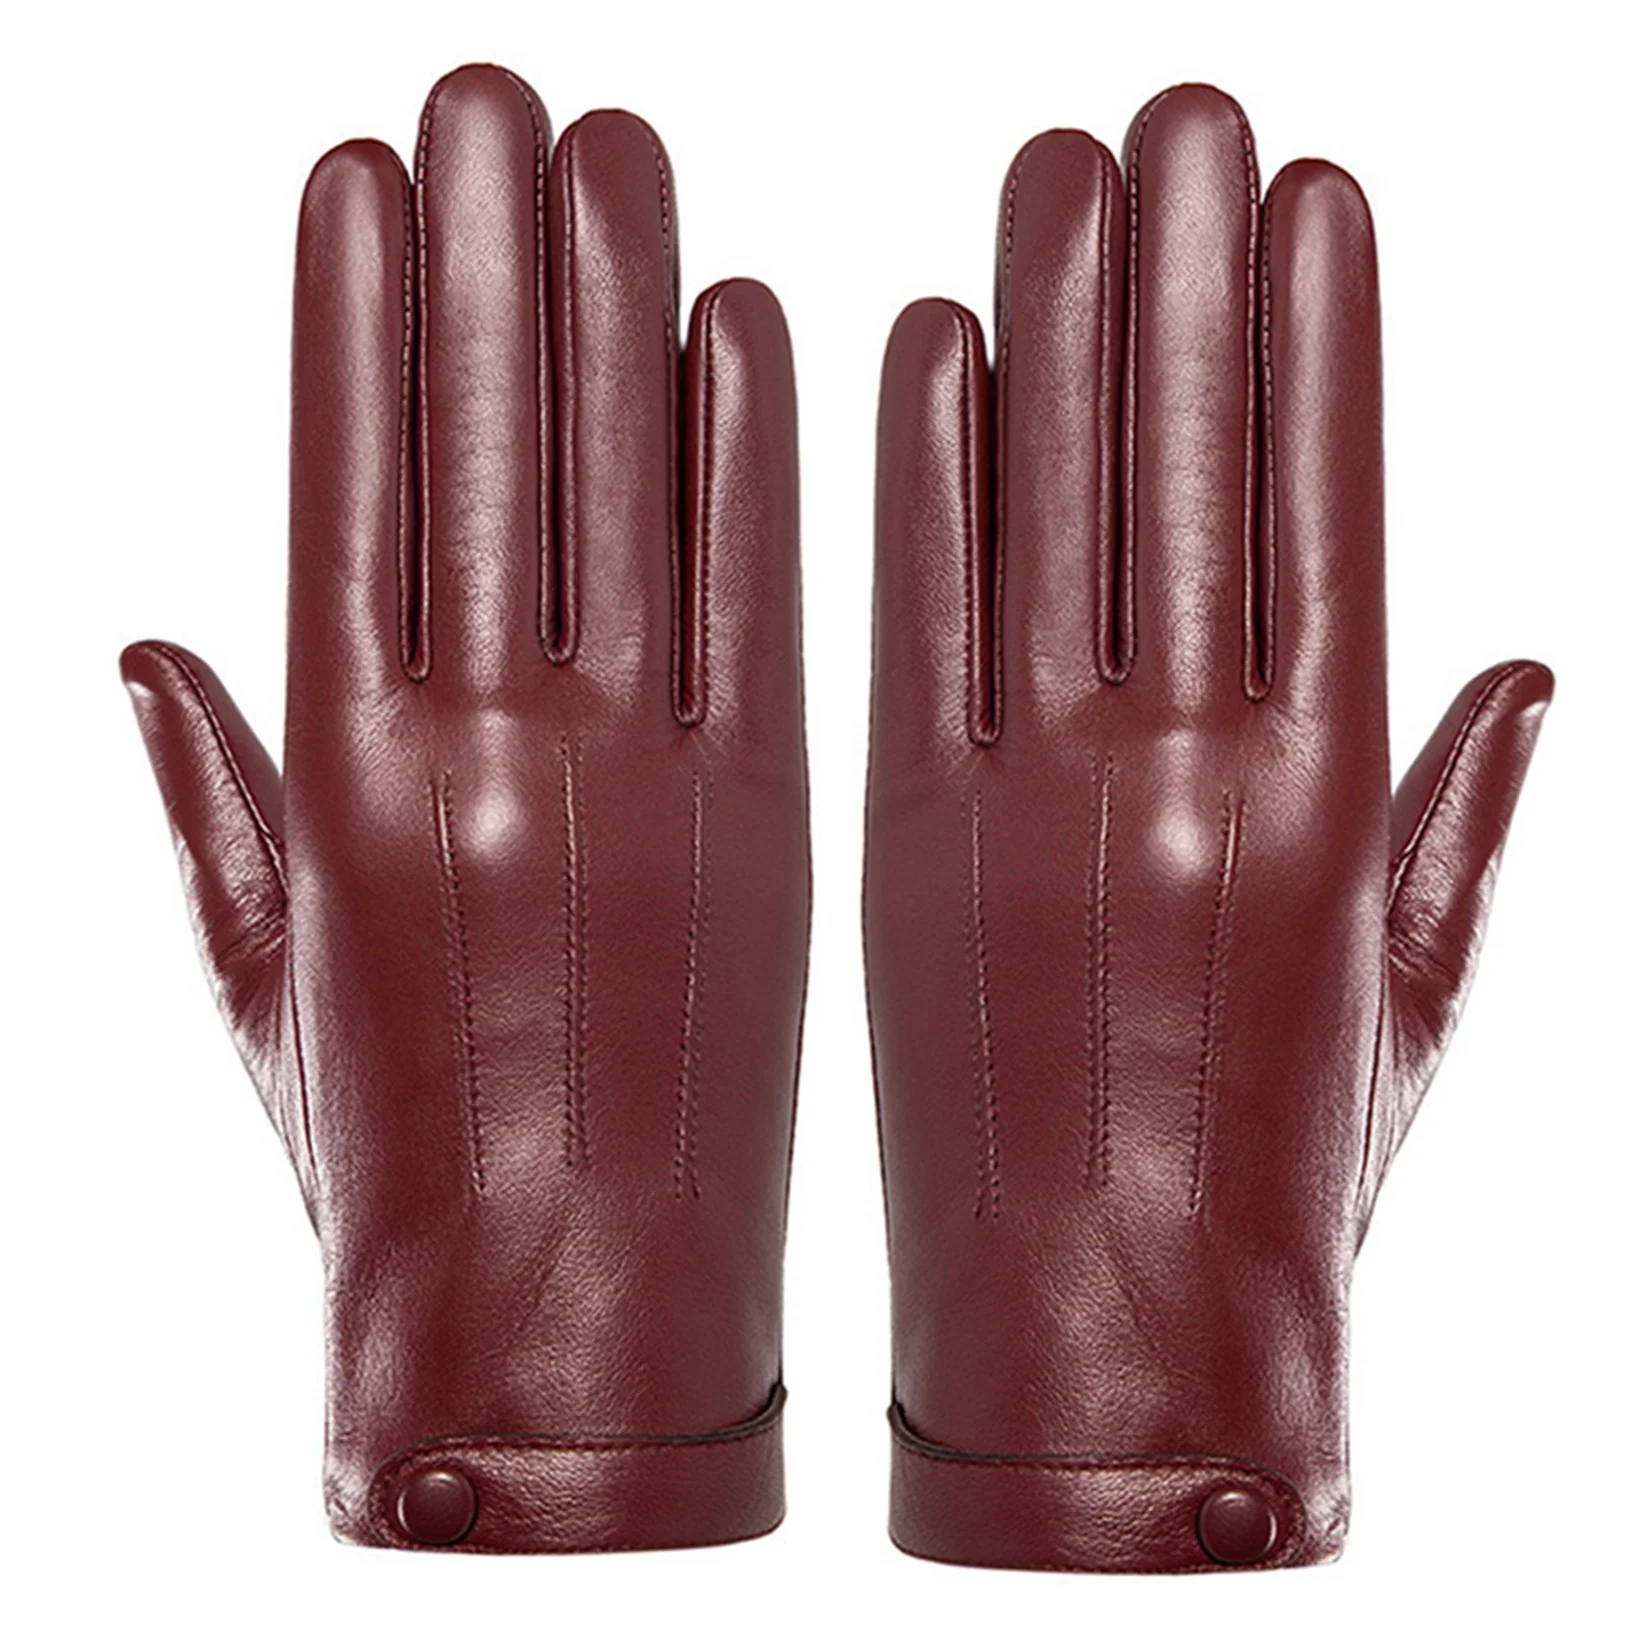 

Women Windproof Leather Gloves with Touchscreen Texting Fingers Fleece Lined Warm Driving Motorcycle Genuine Cycling Gloves